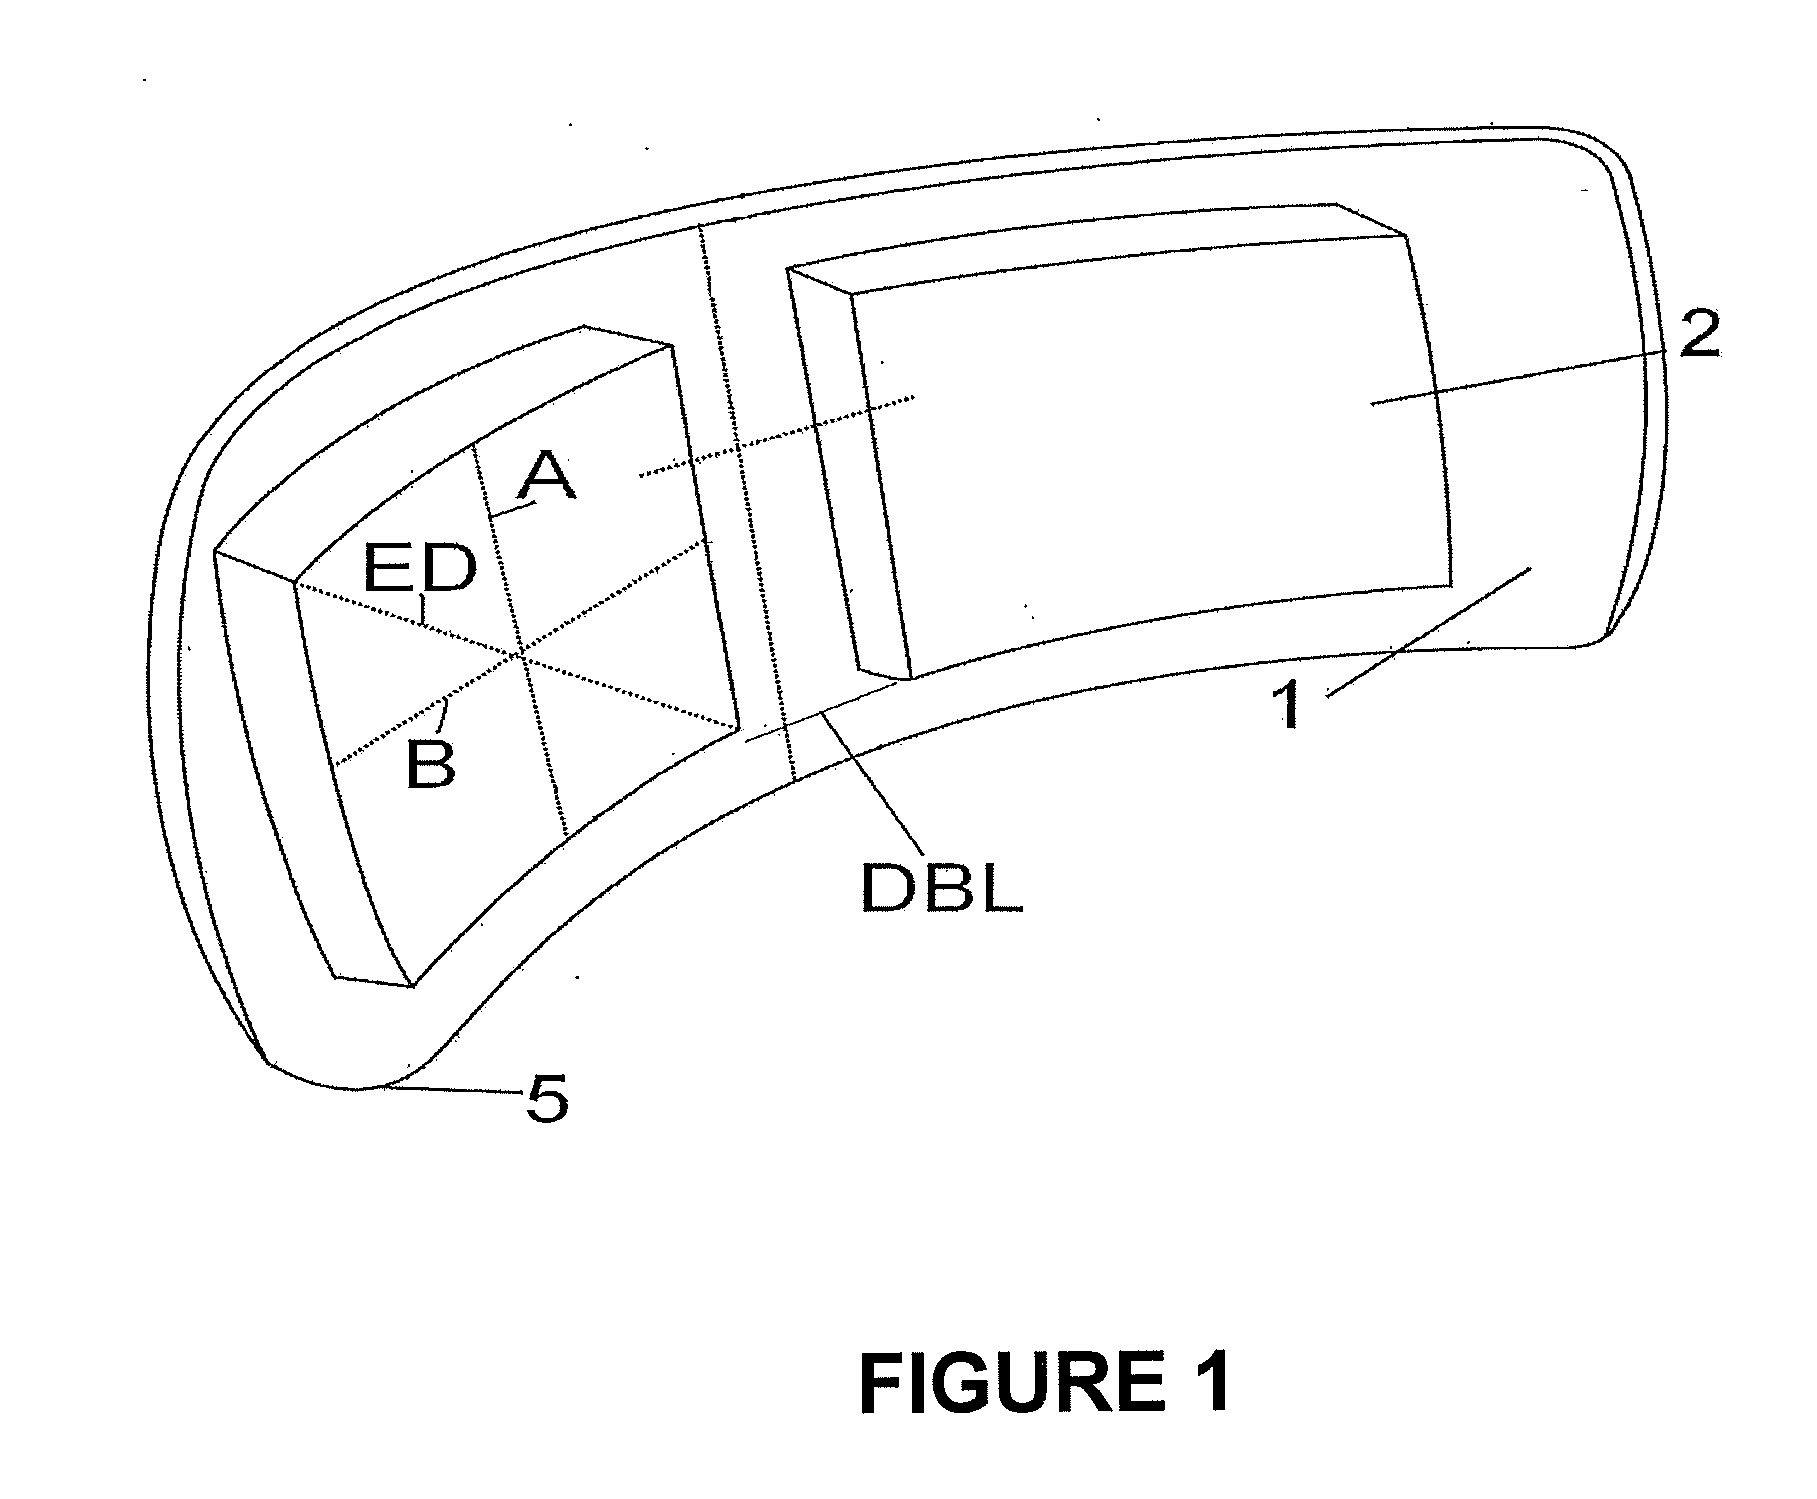 One-piece lens with surplus inner optical material